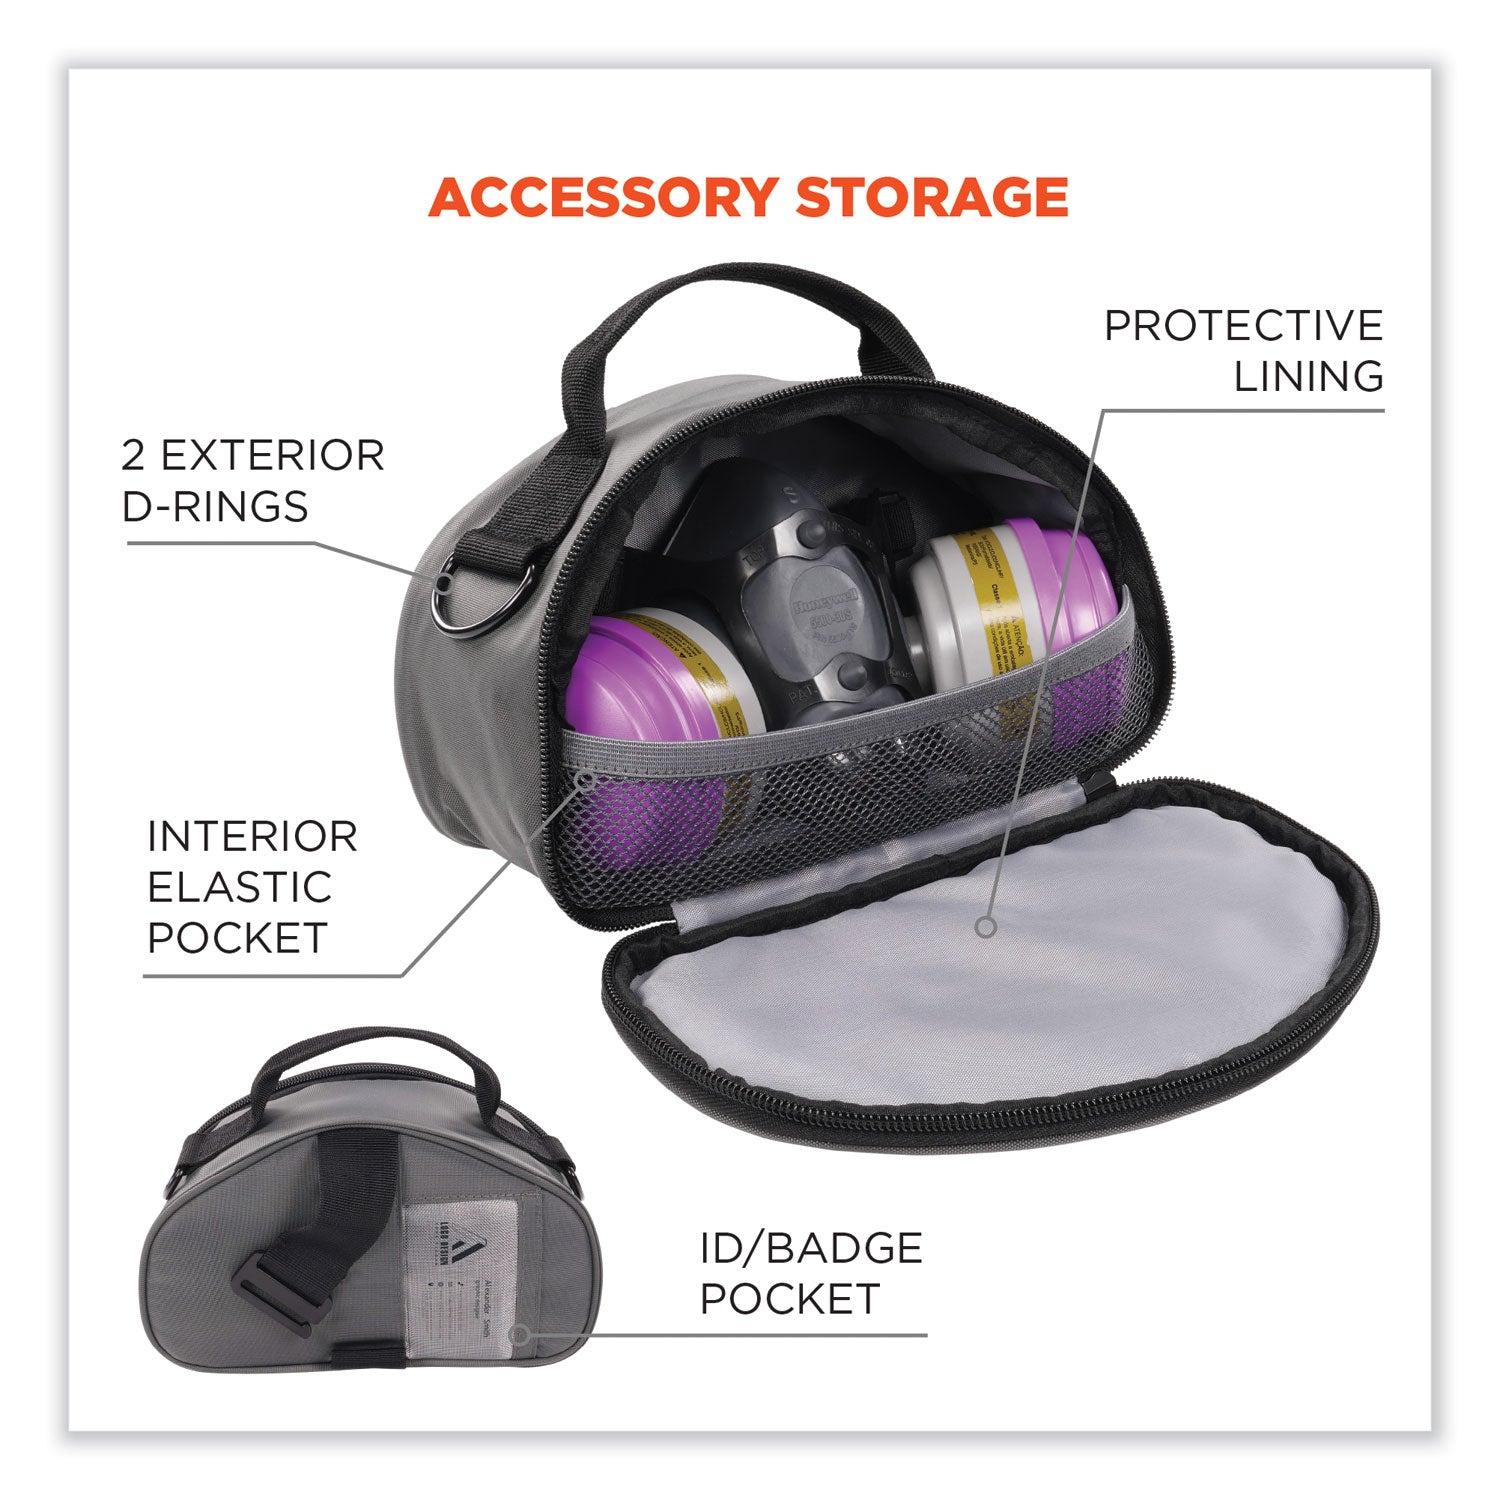 arsenal-5187-clamshell-half-respirator-bag-with-zipper-closure-4-x-9-x-5-gray-ships-in-1-3-business-days_ego13187 - 6